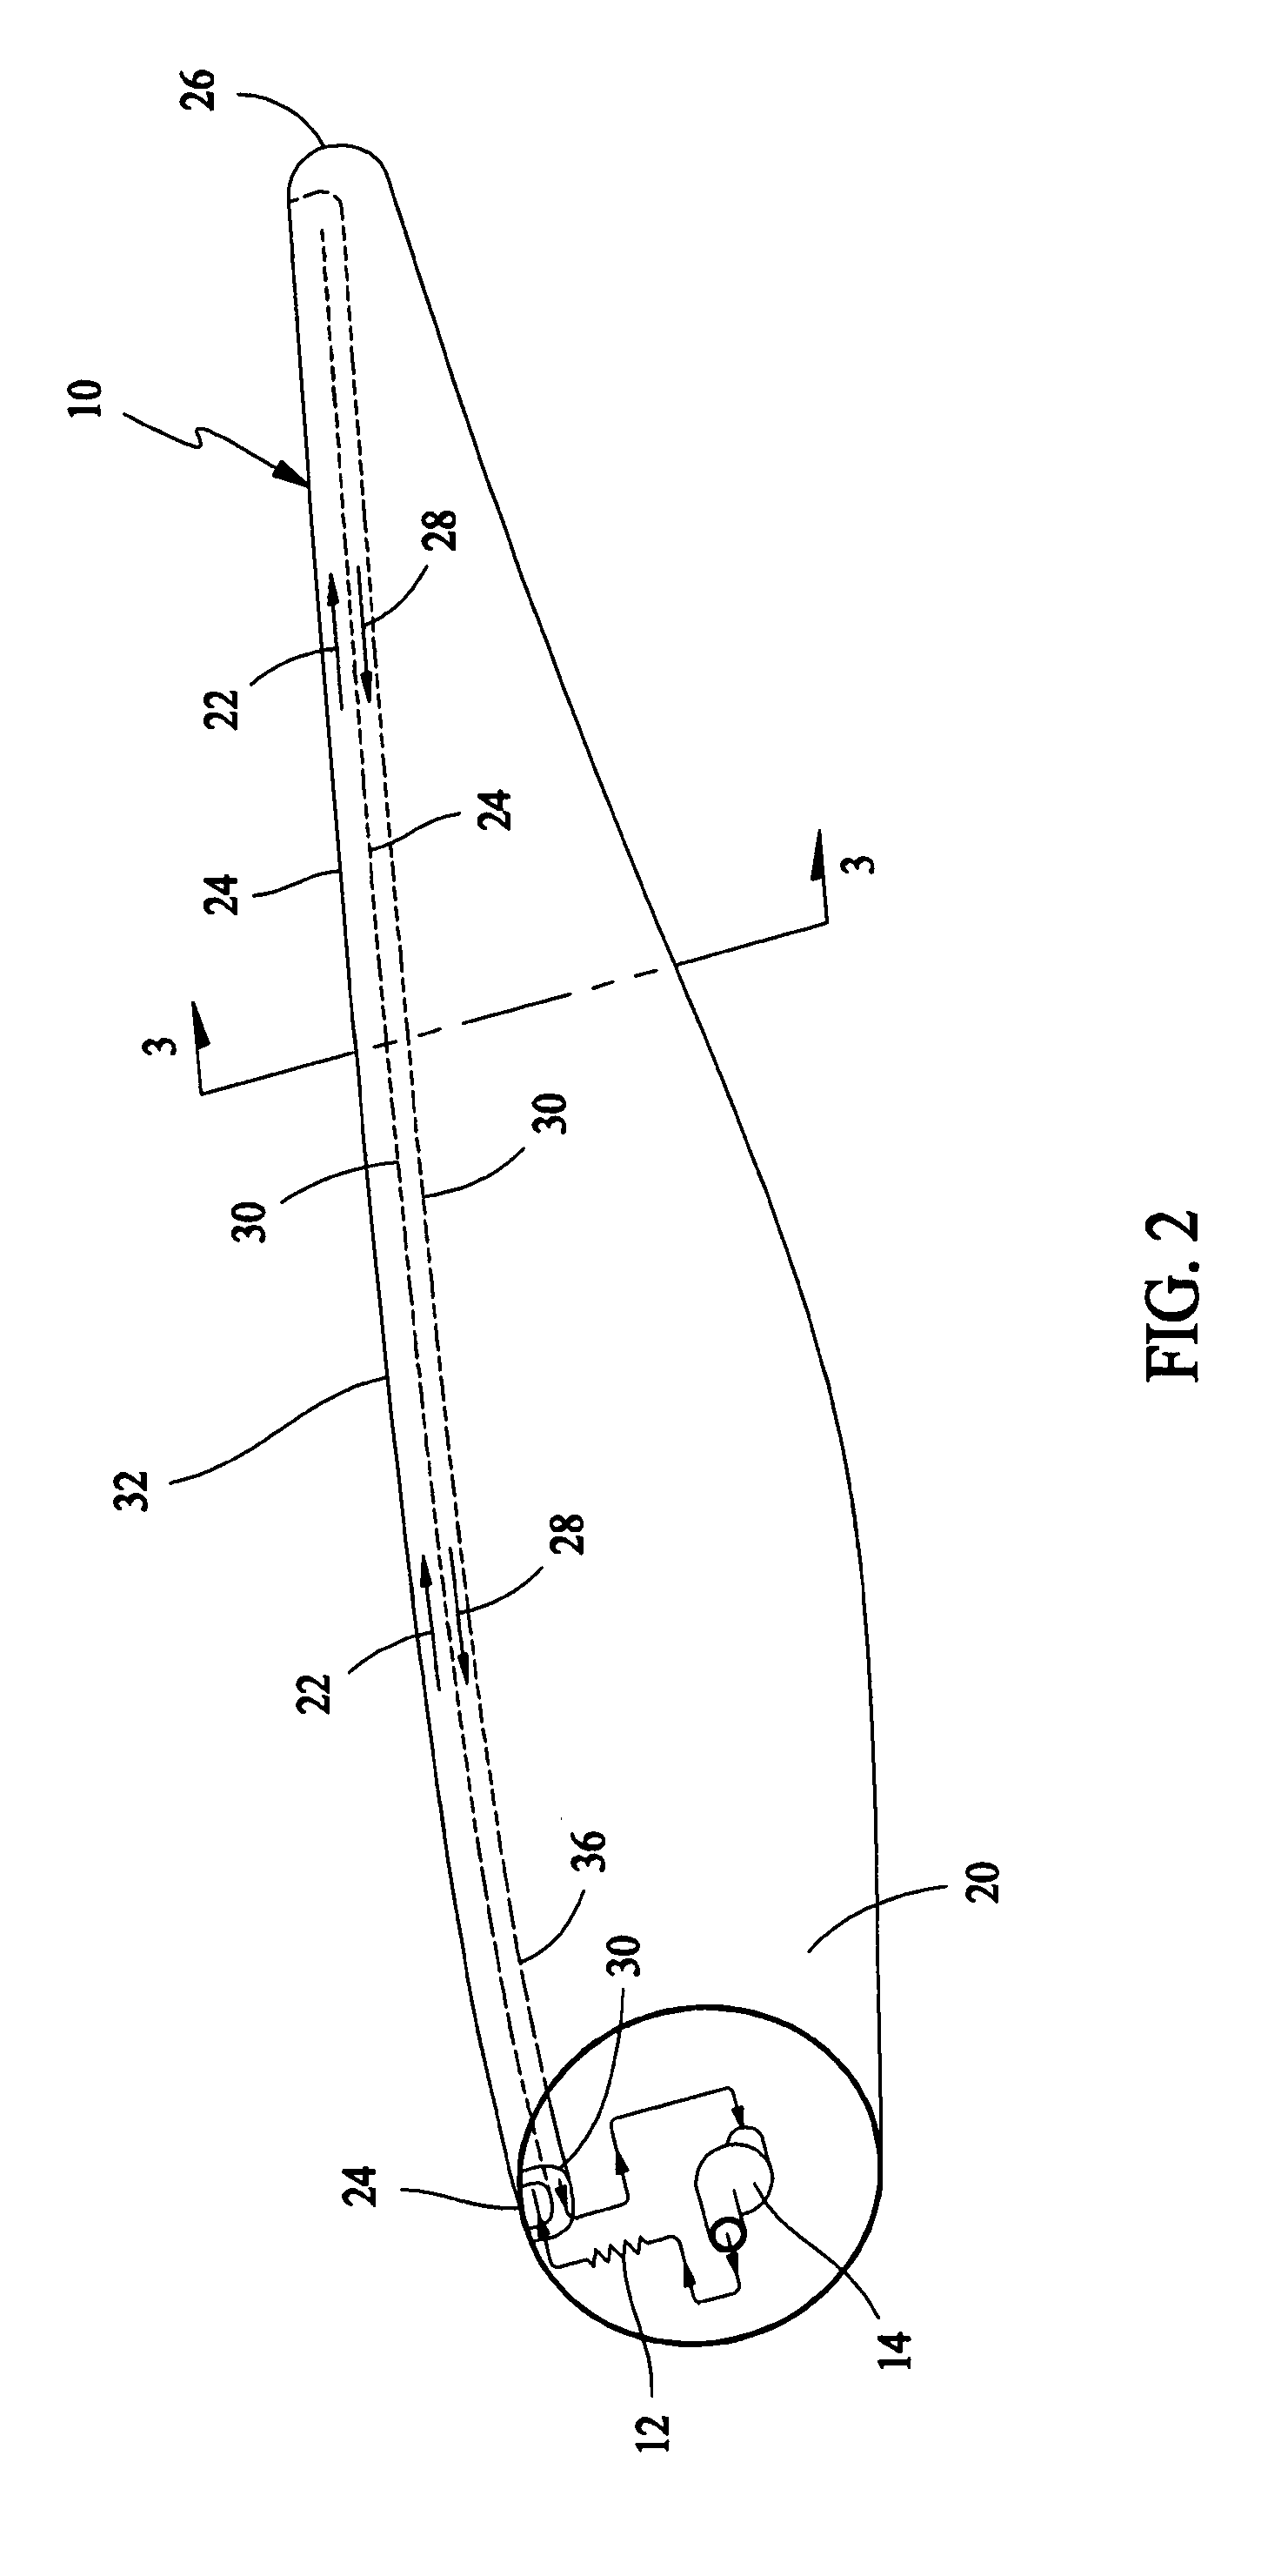 Methods and apparatus for deicing airfoils or rotor blades